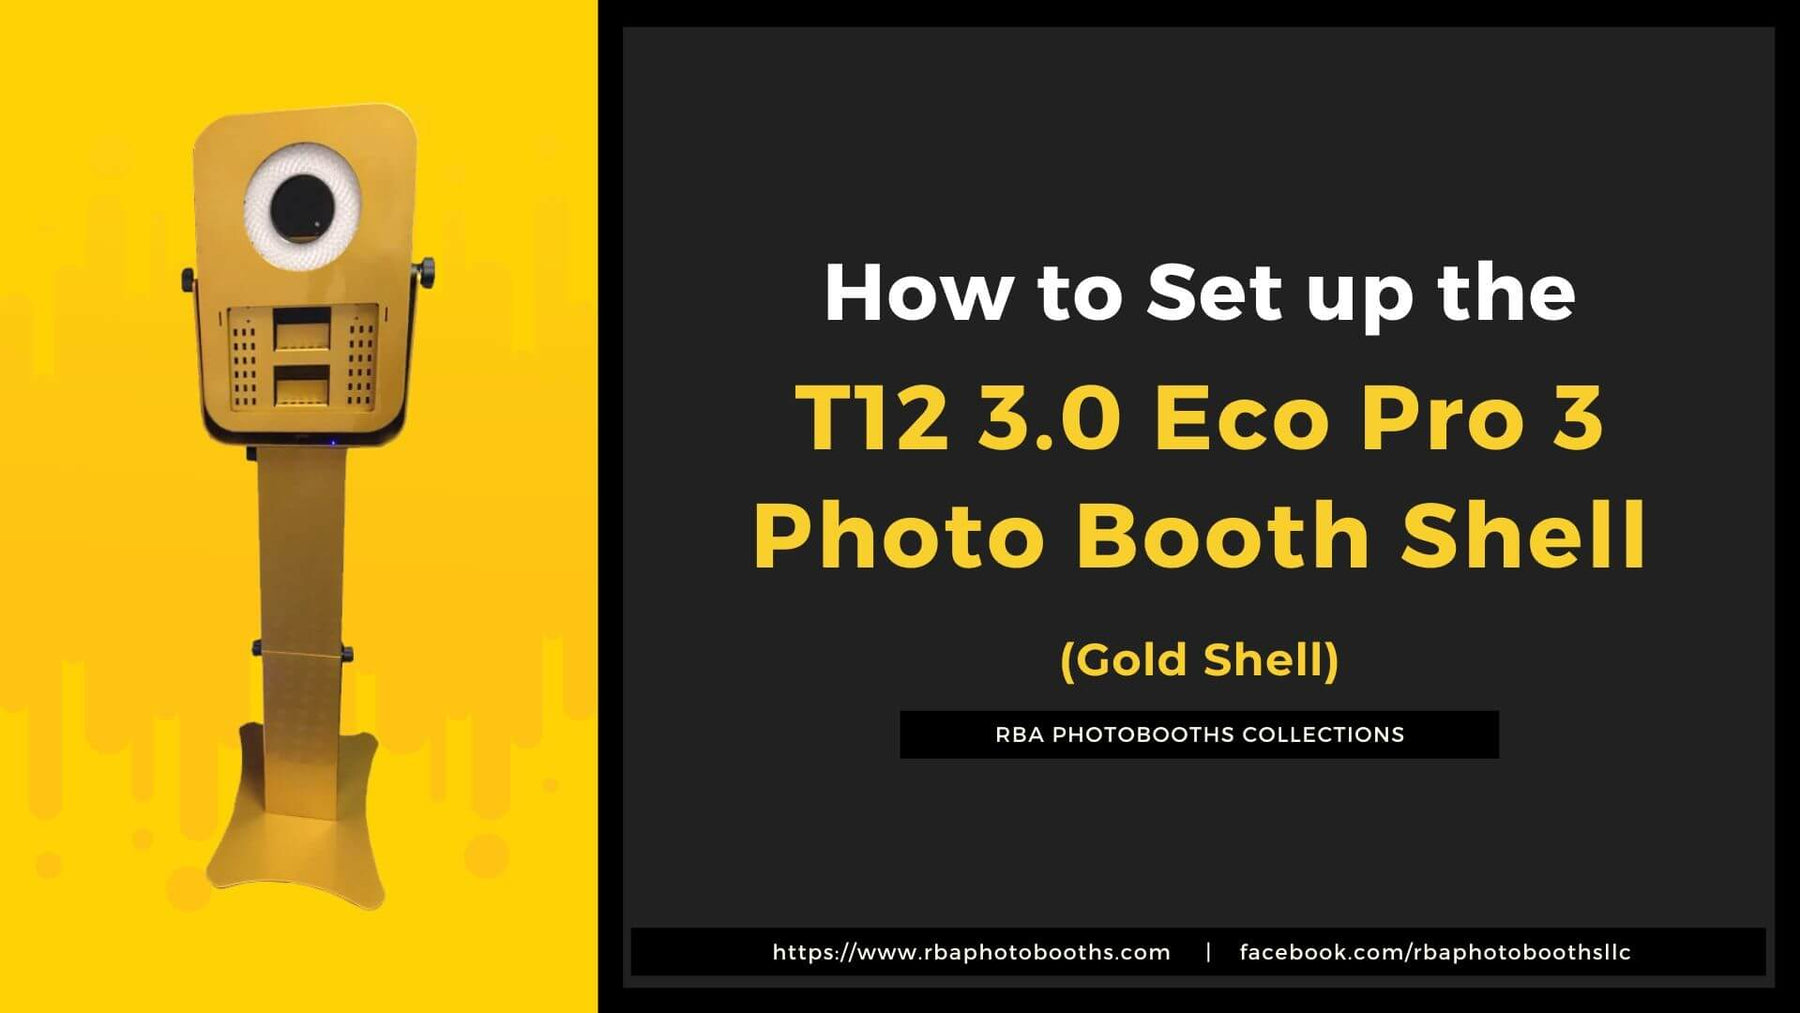 How to Setup or Assemble the T12 3.0 Eco Pro 3 Photo Booth Shell